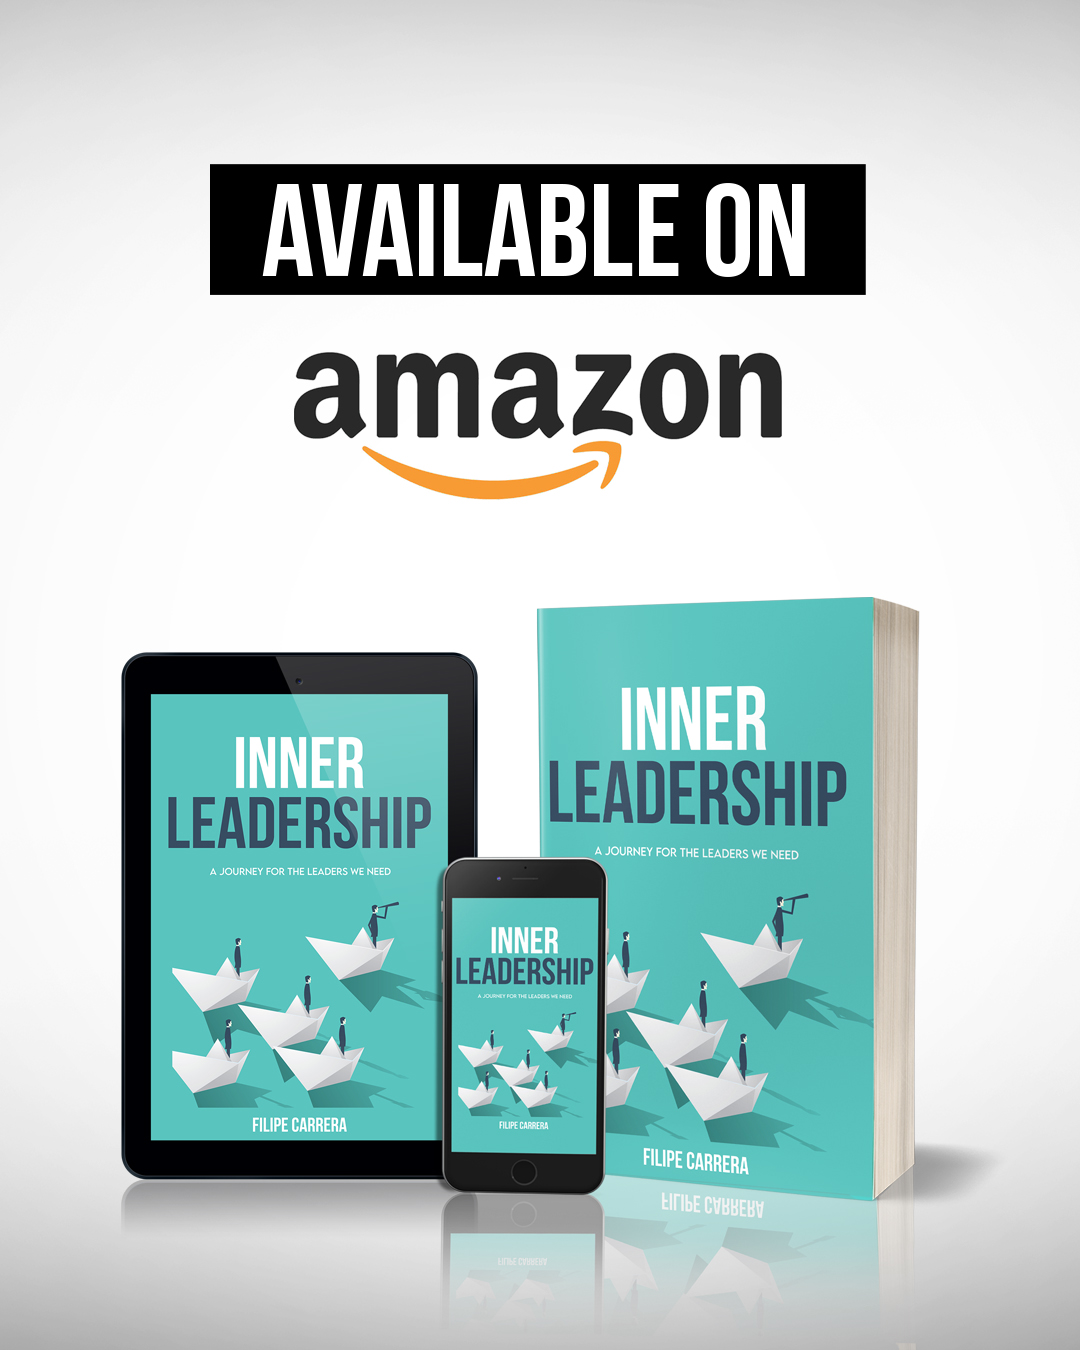 Inner Leardership - A journey for the leaders we need